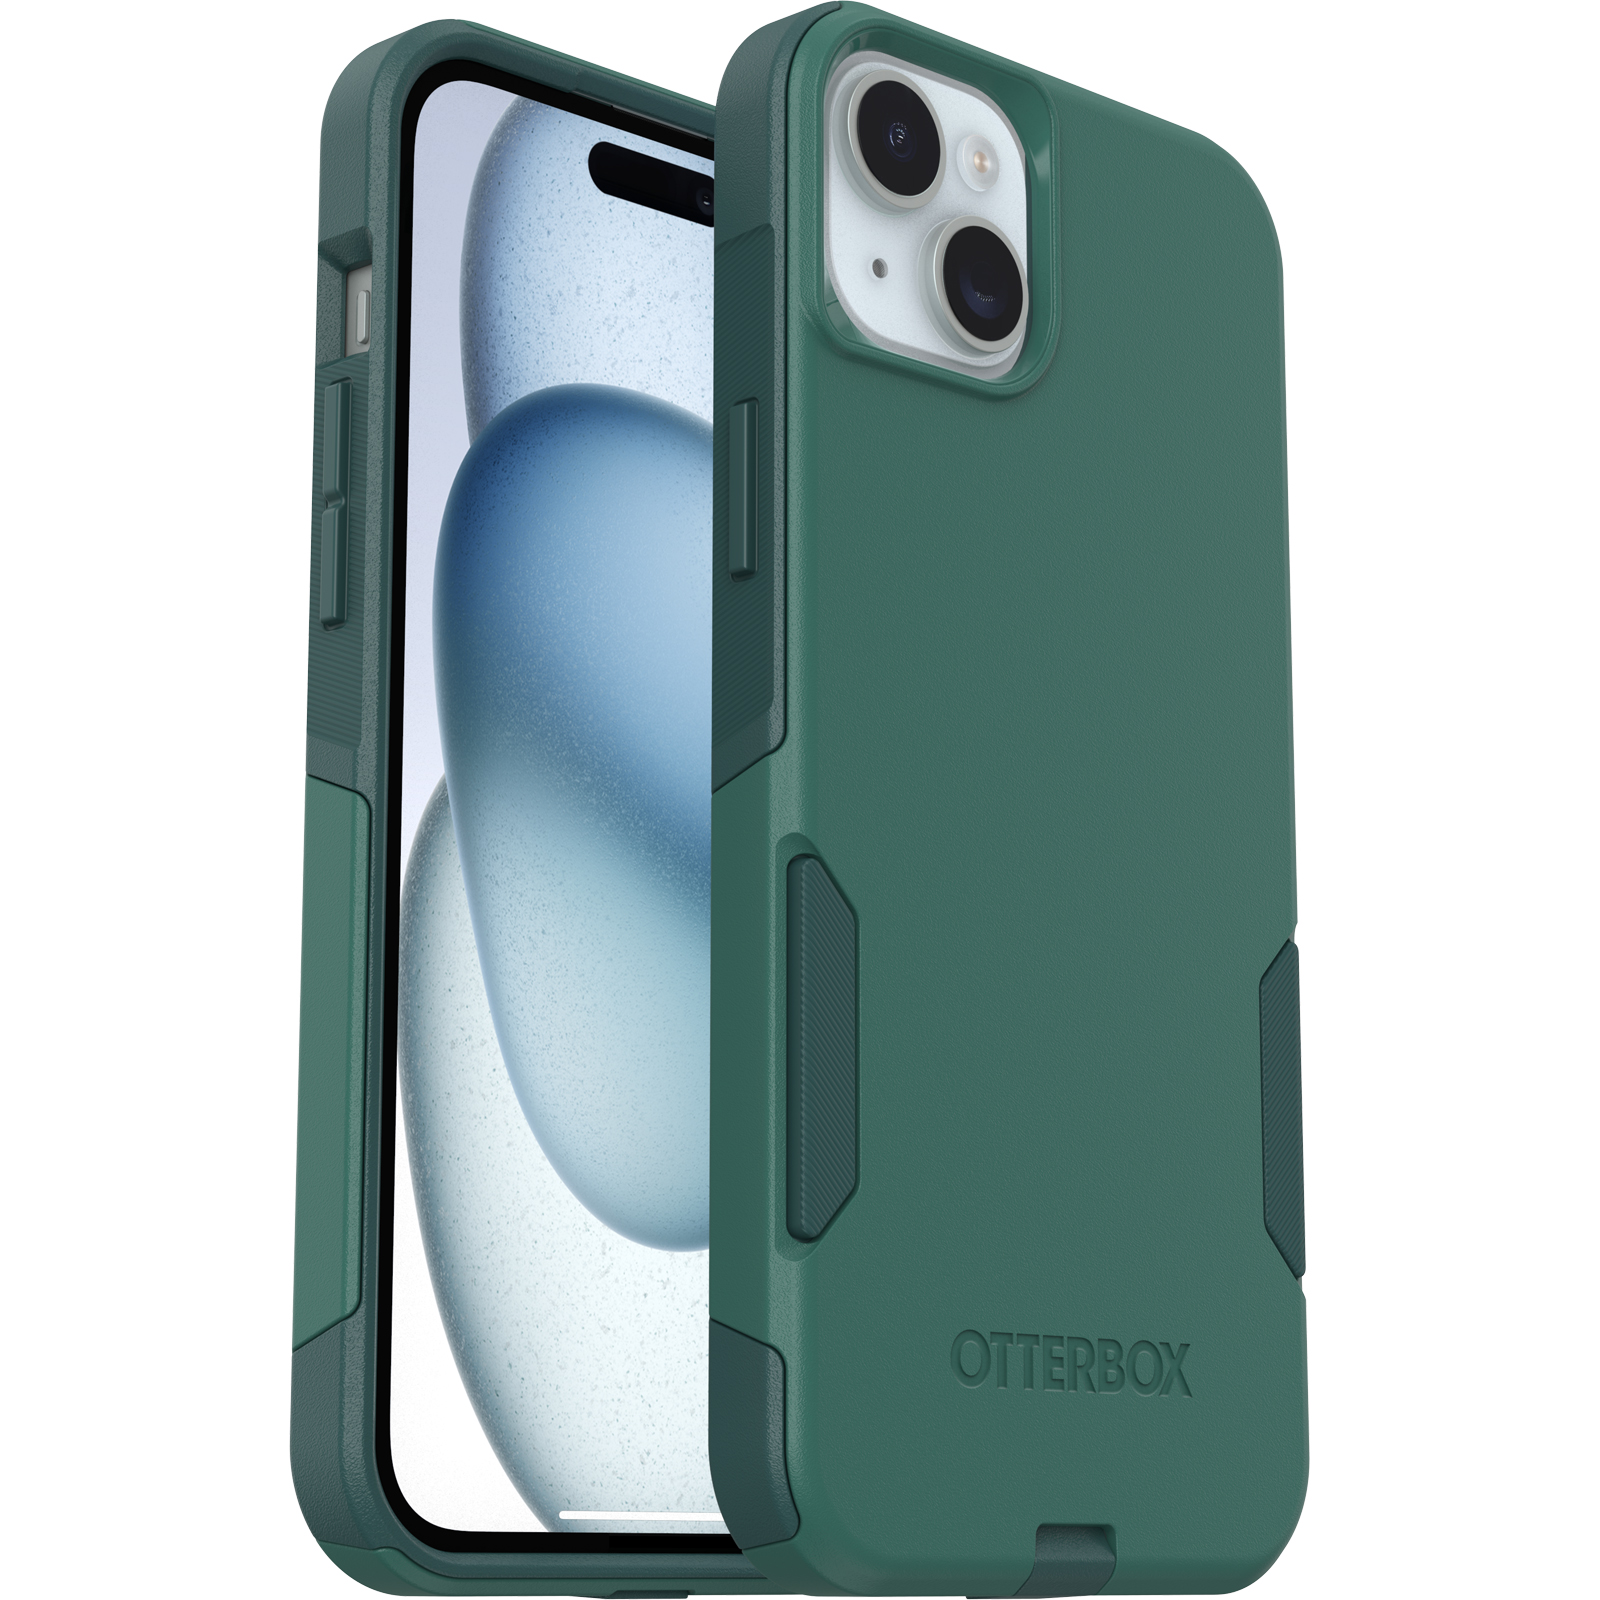 https://www.otterbox.com/on/demandware.static/-/Sites-masterCatalog/default/dw23d4c193/productimages/dis/cases-screen-protection/commuter-iphb23/commuter-iphb23-get-your-greens-1.jpg